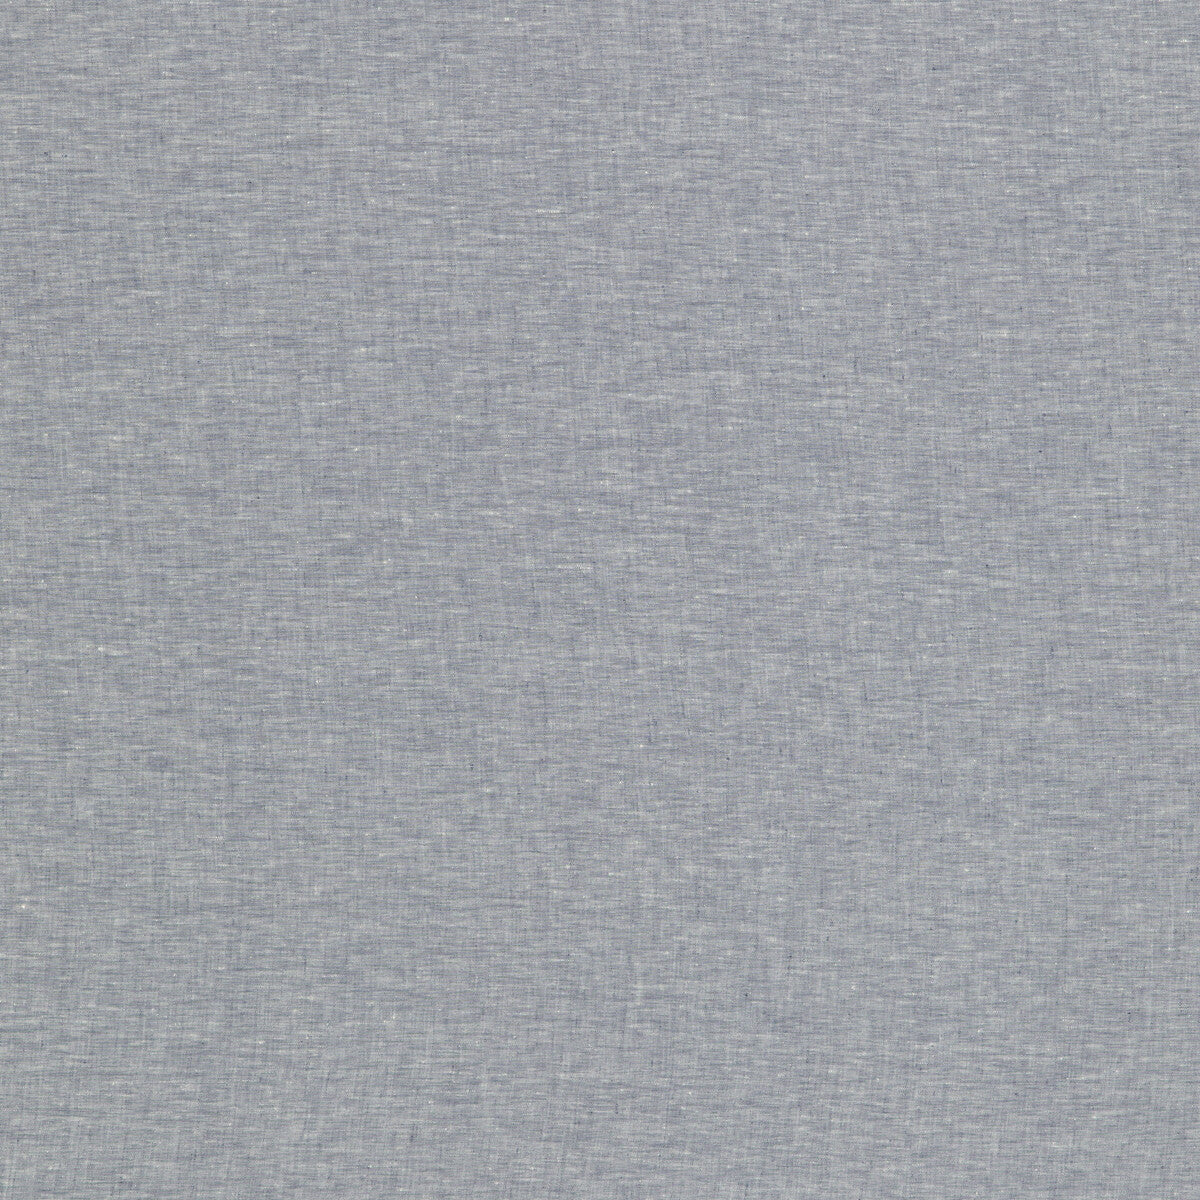 Nala Linen fabric in denim color - pattern ED85329.640.0 - by Threads in the Nala Linens collection